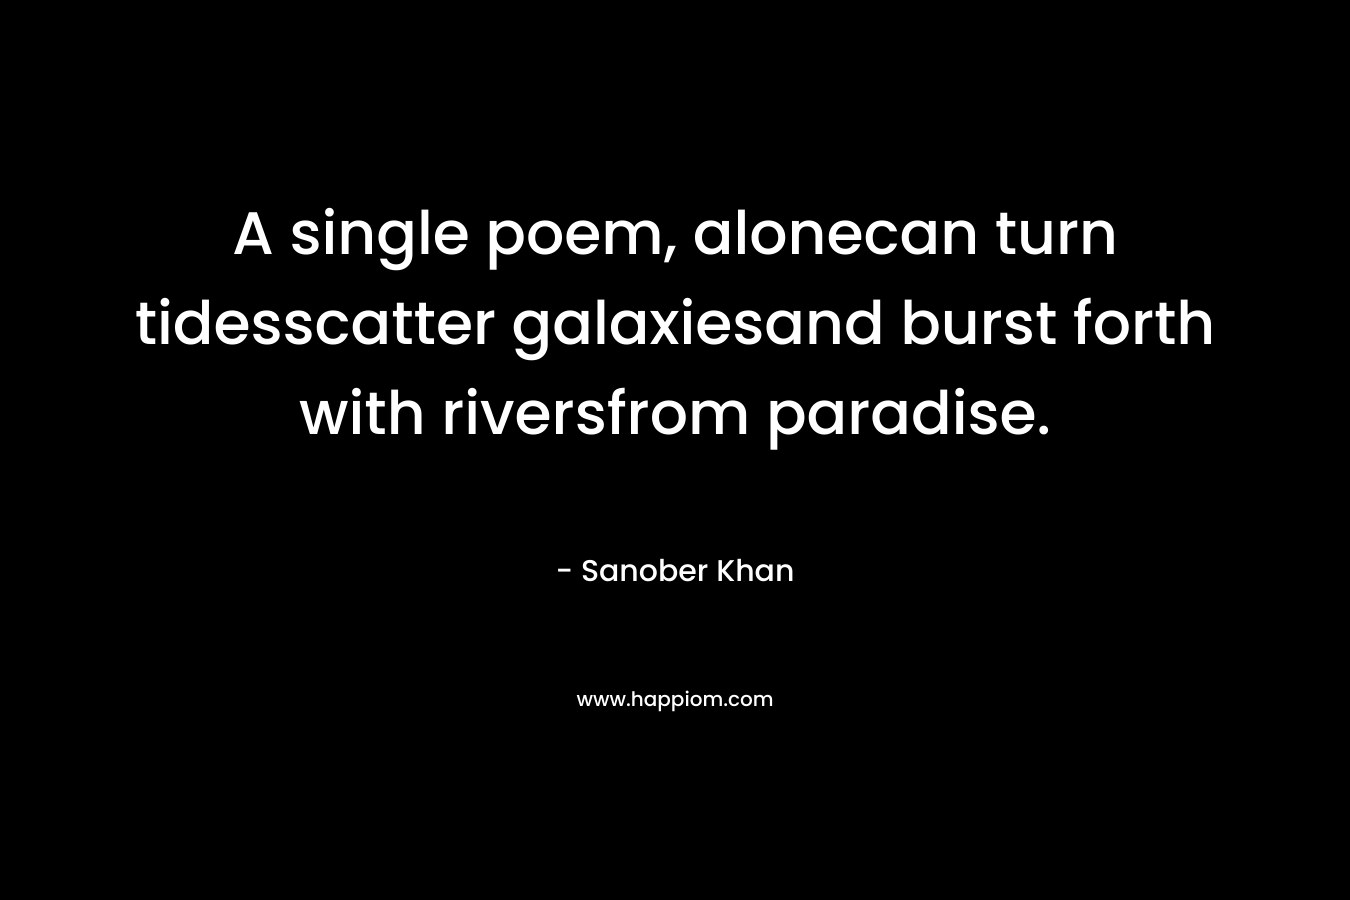 A single poem, alonecan turn tidesscatter galaxiesand burst forth with riversfrom paradise.